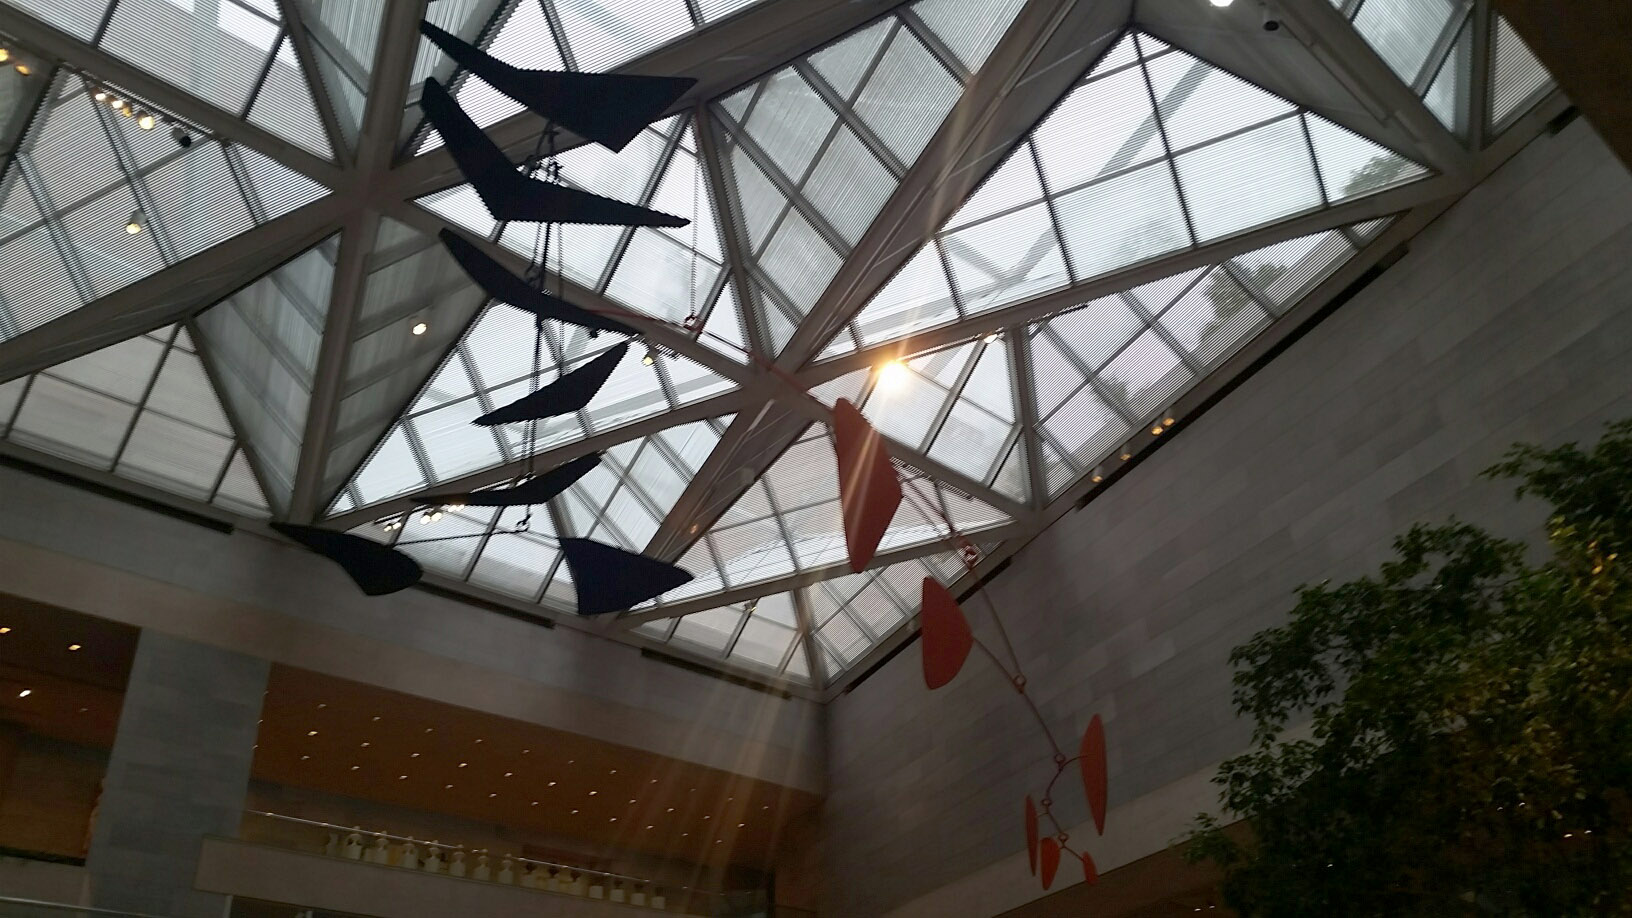 This mobile by Alexander Calder Mobile has a 76-foot wingspan and moves with the air flow inside the East Building of the National Gallery of Art.  The artist designed it for the gallery but he never got to name this work because he died before it was installed. It was his last work and his largest work.  (WTOP/Kathy Stewart)